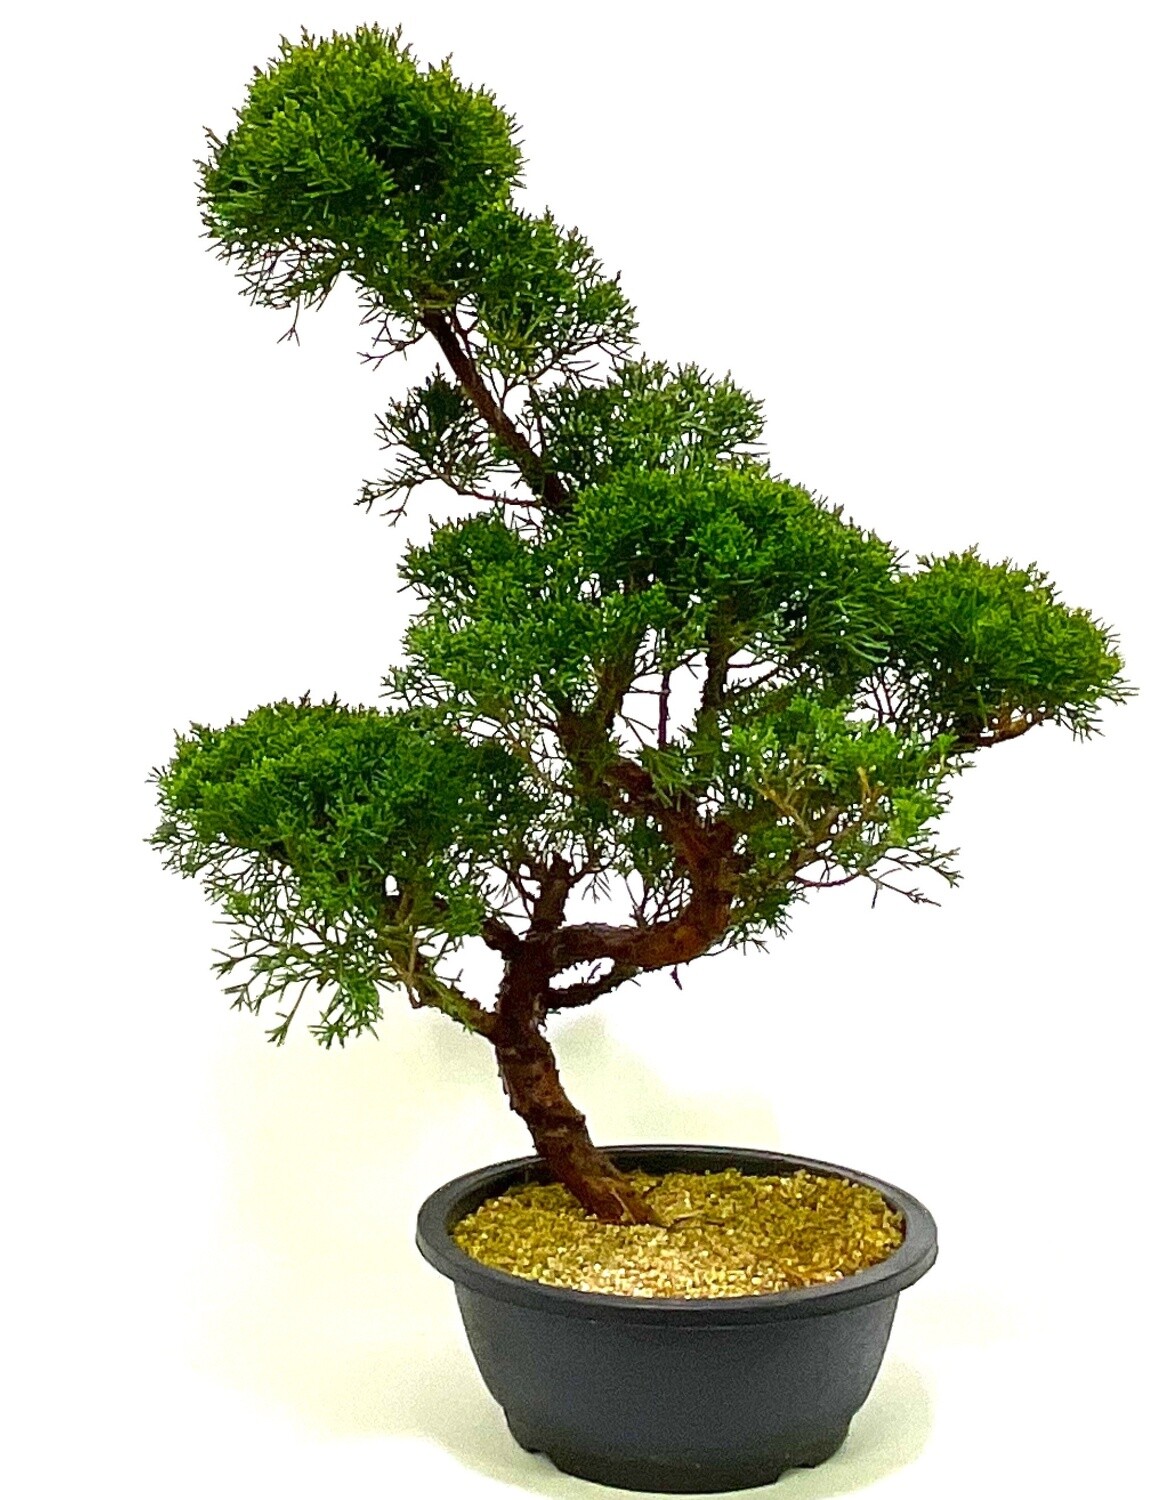 Large Shaped Chinese Juniper Bonsai tree - excellent movement and styling options SB1187